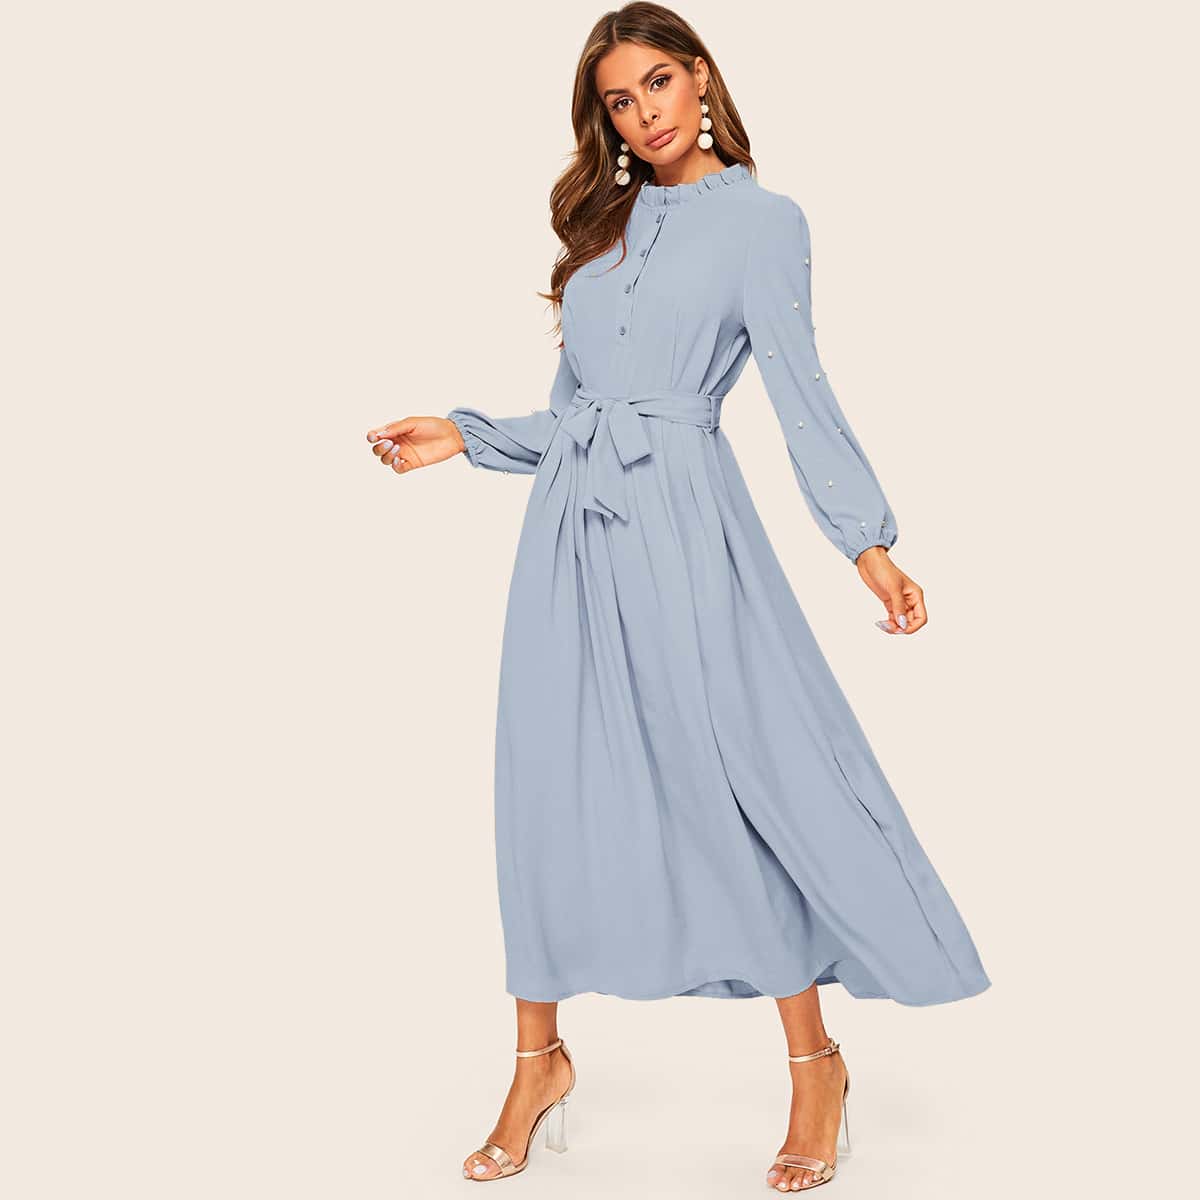 Frill neck dress with sleeves